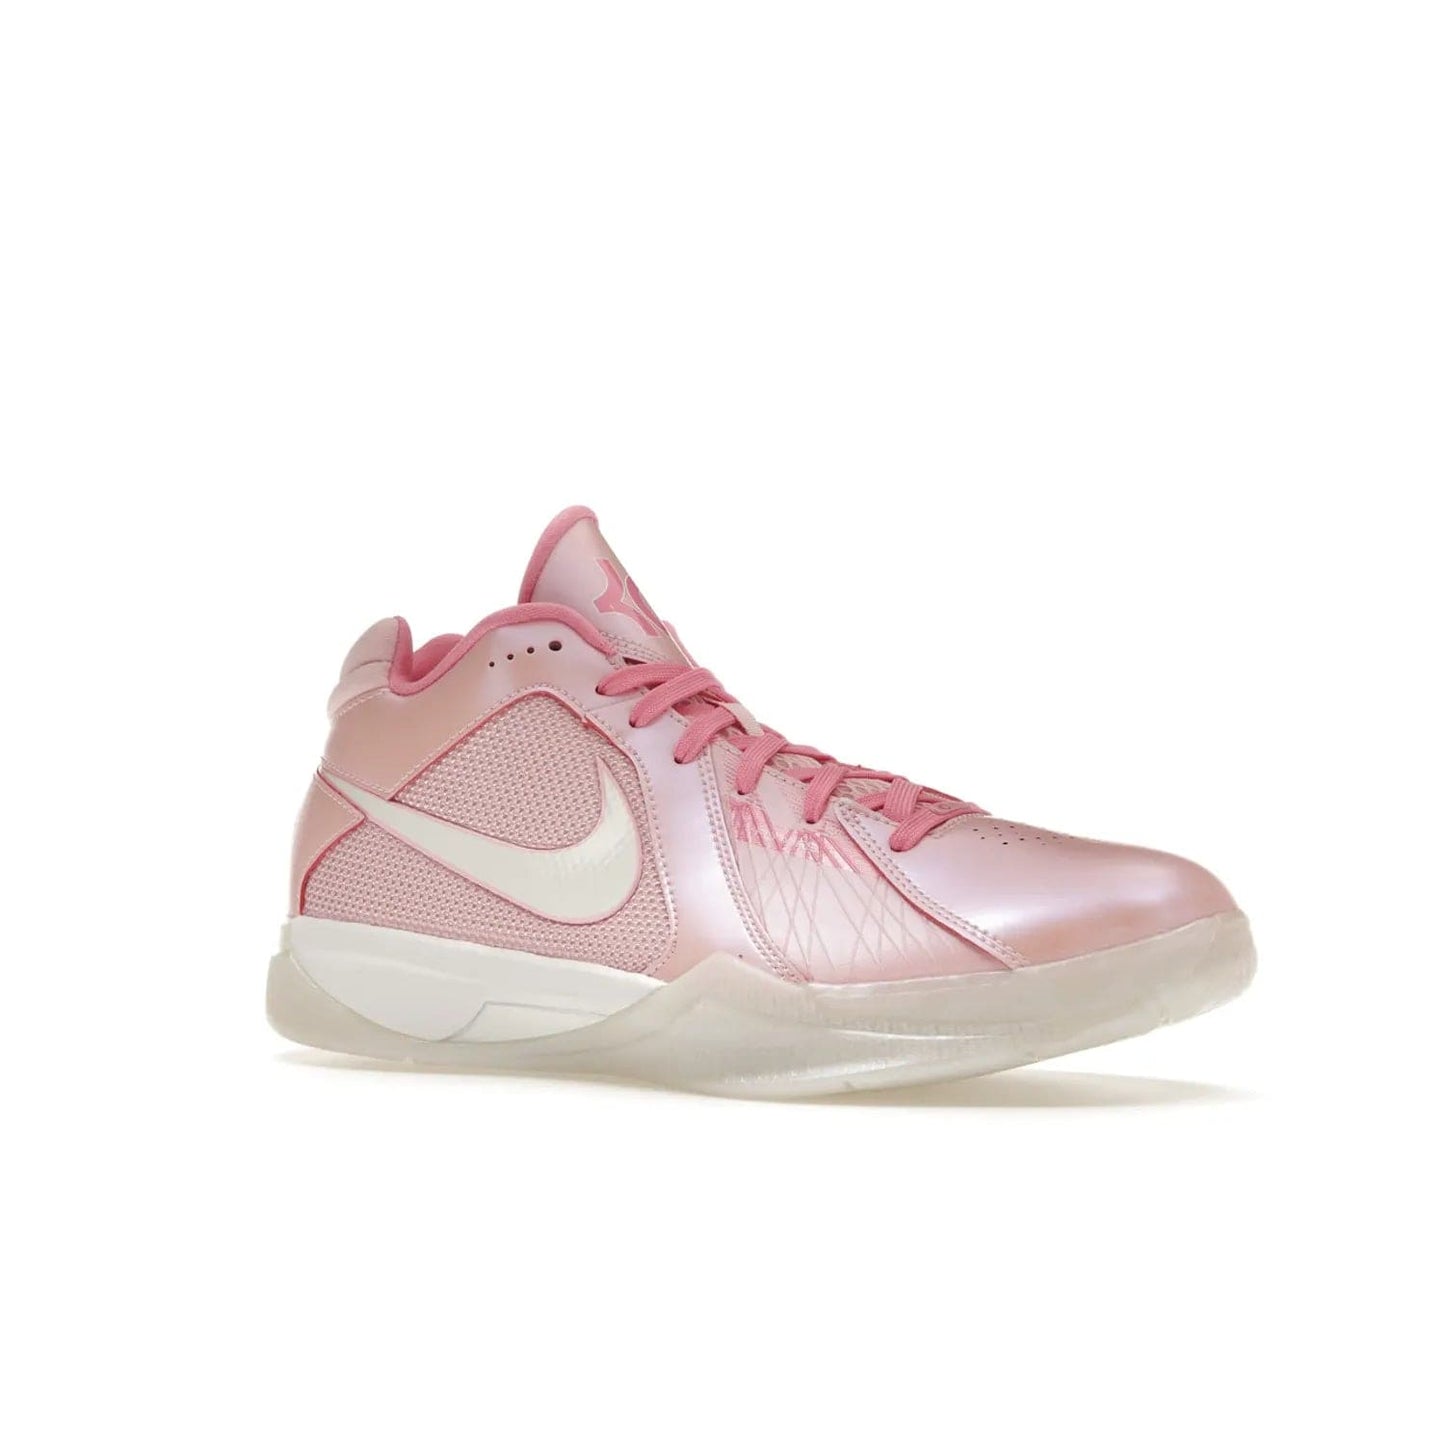 Nike KD 3 Aunt Pearl - Image 4 - Only at www.BallersClubKickz.com - Introducing the Nike KD 3 Aunt Pearl. Featuring a bold Medium Soft Pink, White, & Lotus Pink colorway. Get ready to stand out this October 15th.